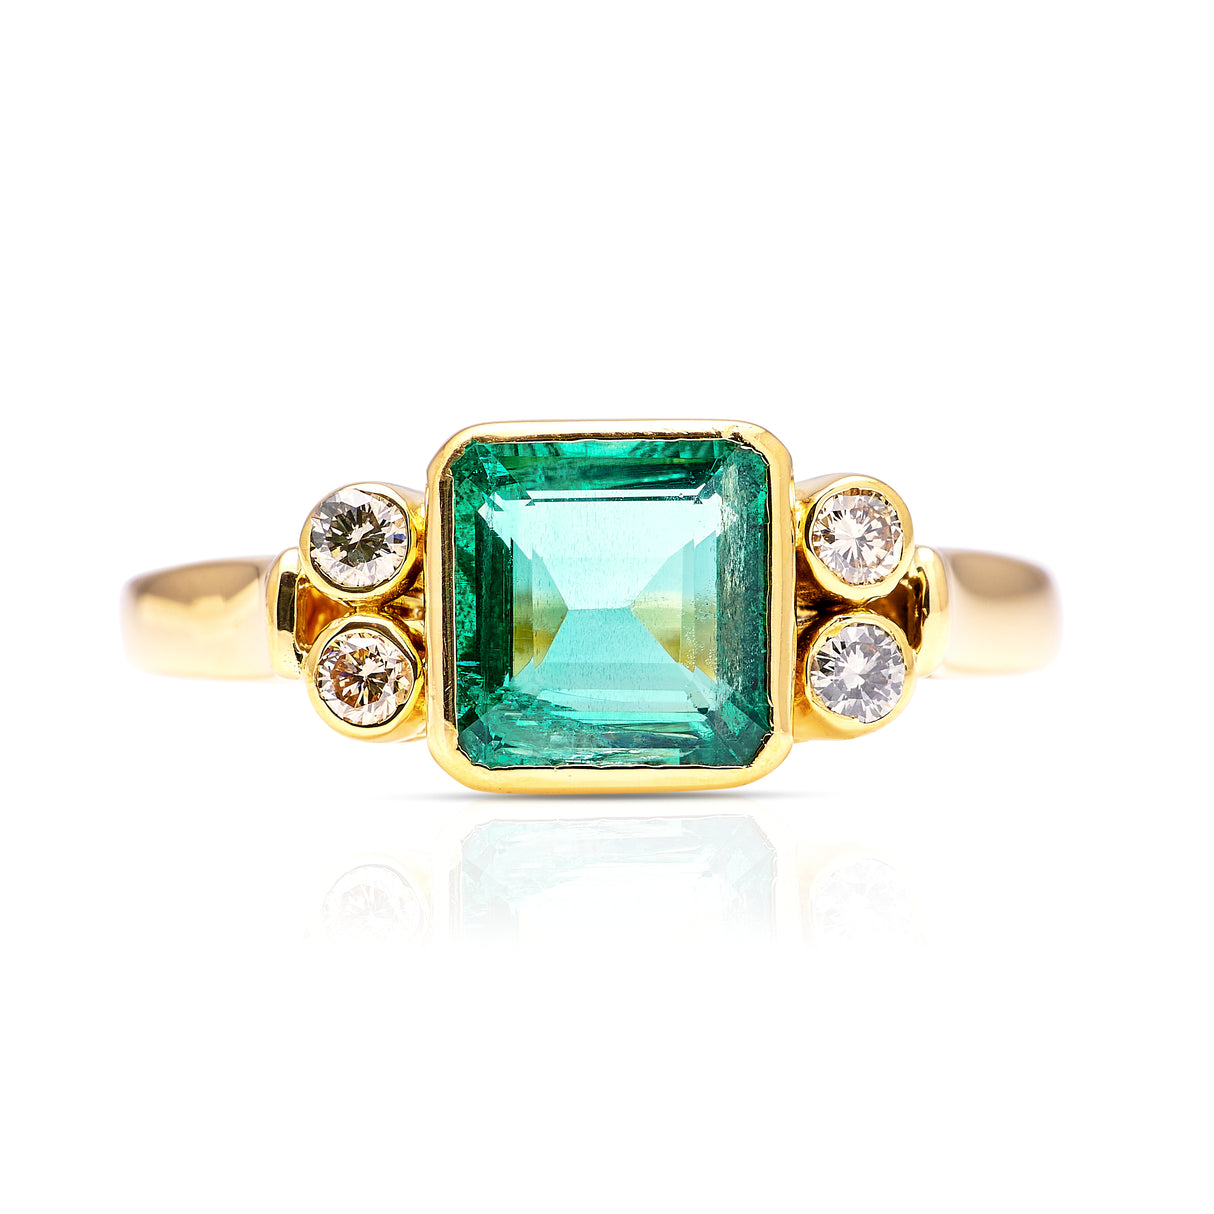 Vintage, emerald and diamond ring, 18ct yellow gold